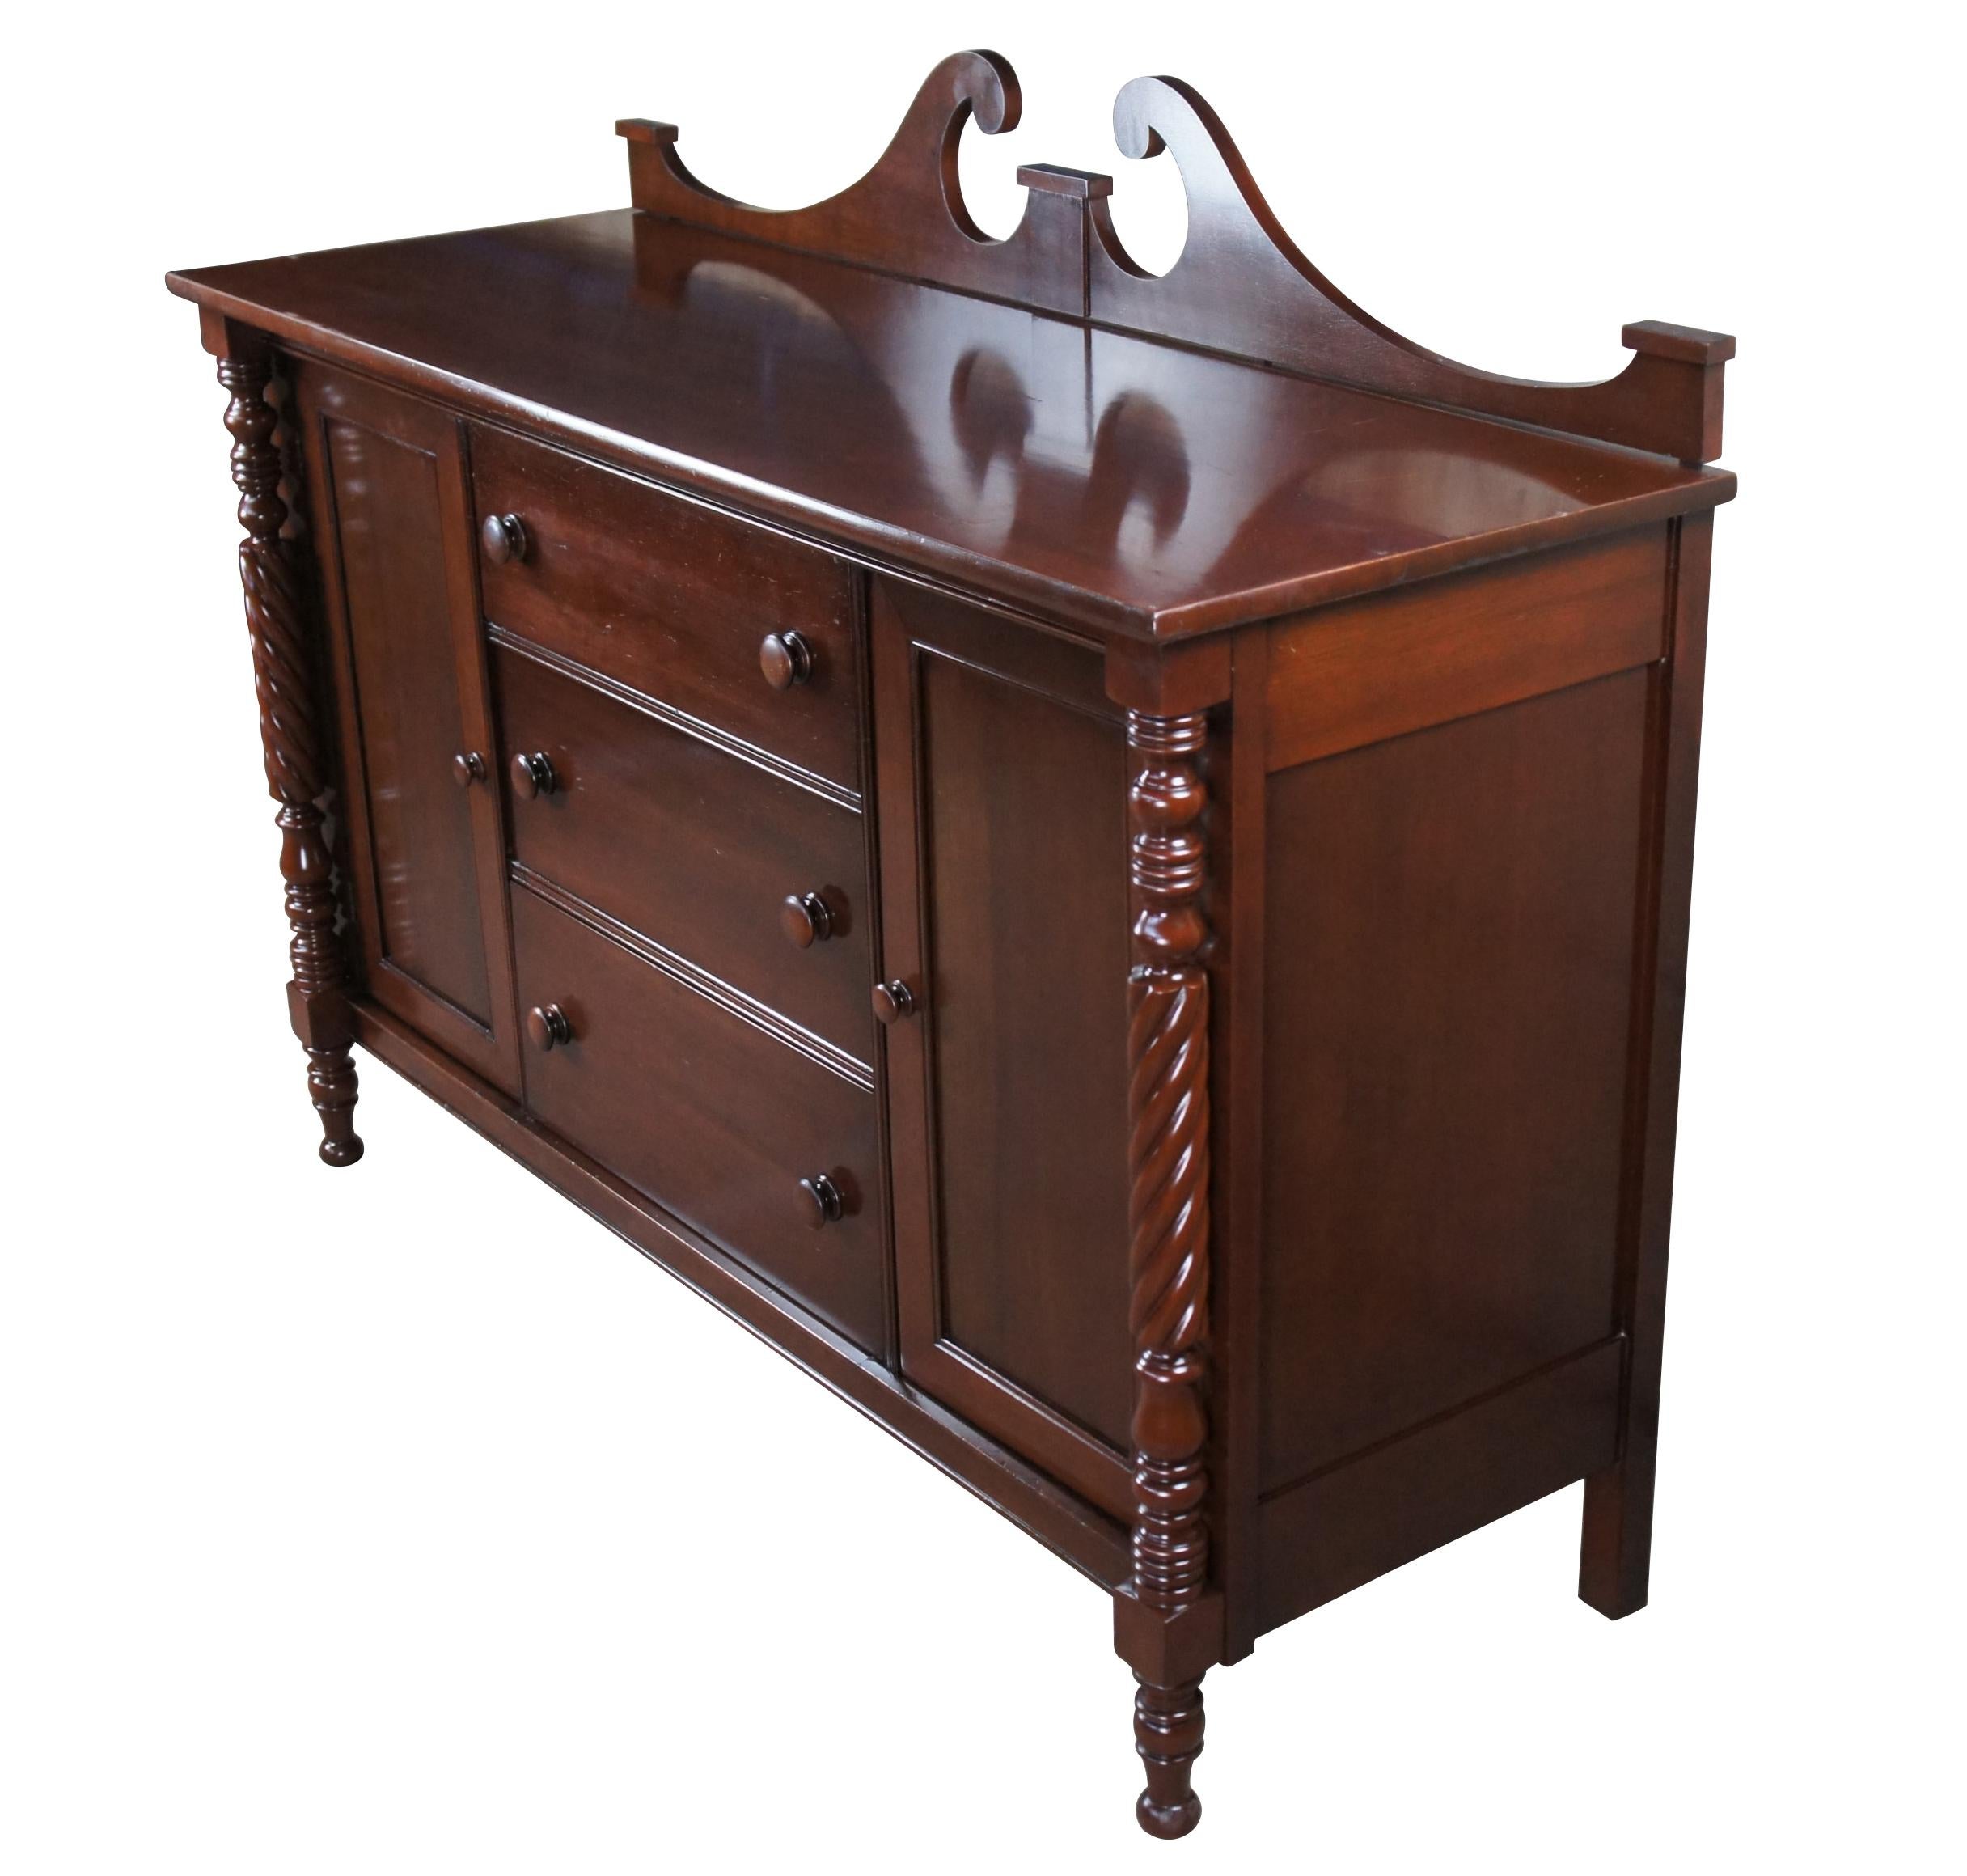 Antique Styled by Park buffet, sideboard or credenza.  Made of cherry featuring Empire styling with open pediment backsplash, barley twisted supports, three drawers, and two cabinets.  Glass top included.

Park, Authetic American Reproductions,